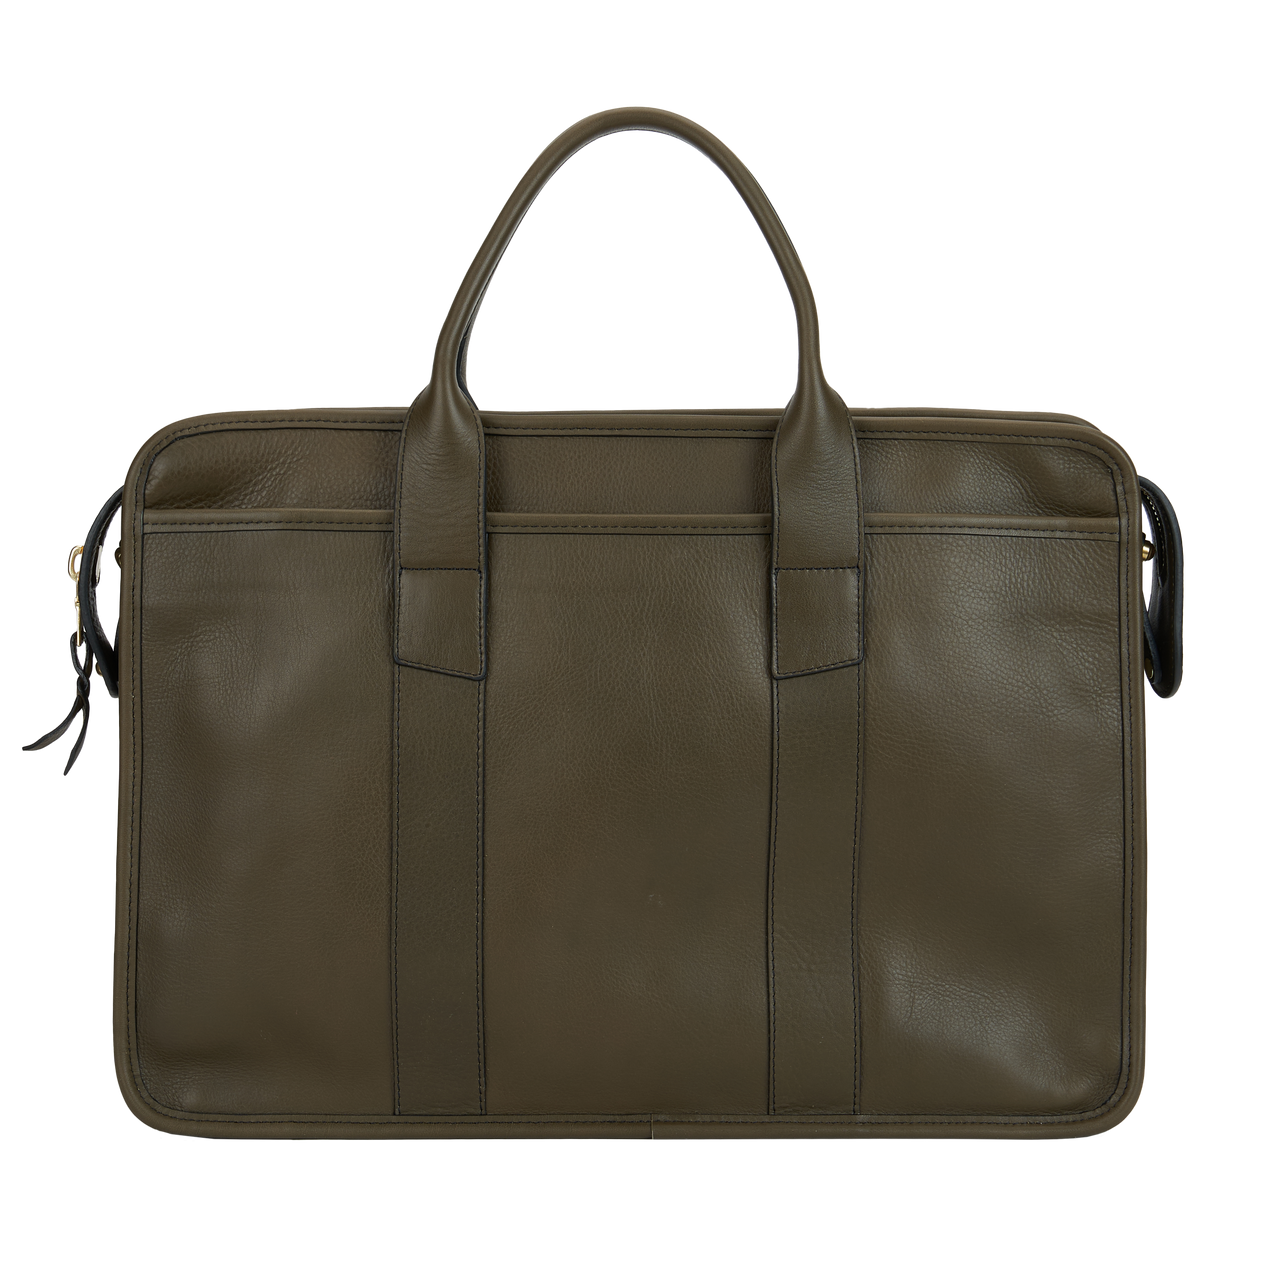 Frank Clegg x WJ & Co. Bound Edge Zip-Top Briefcase in Olive Tumbled Leather